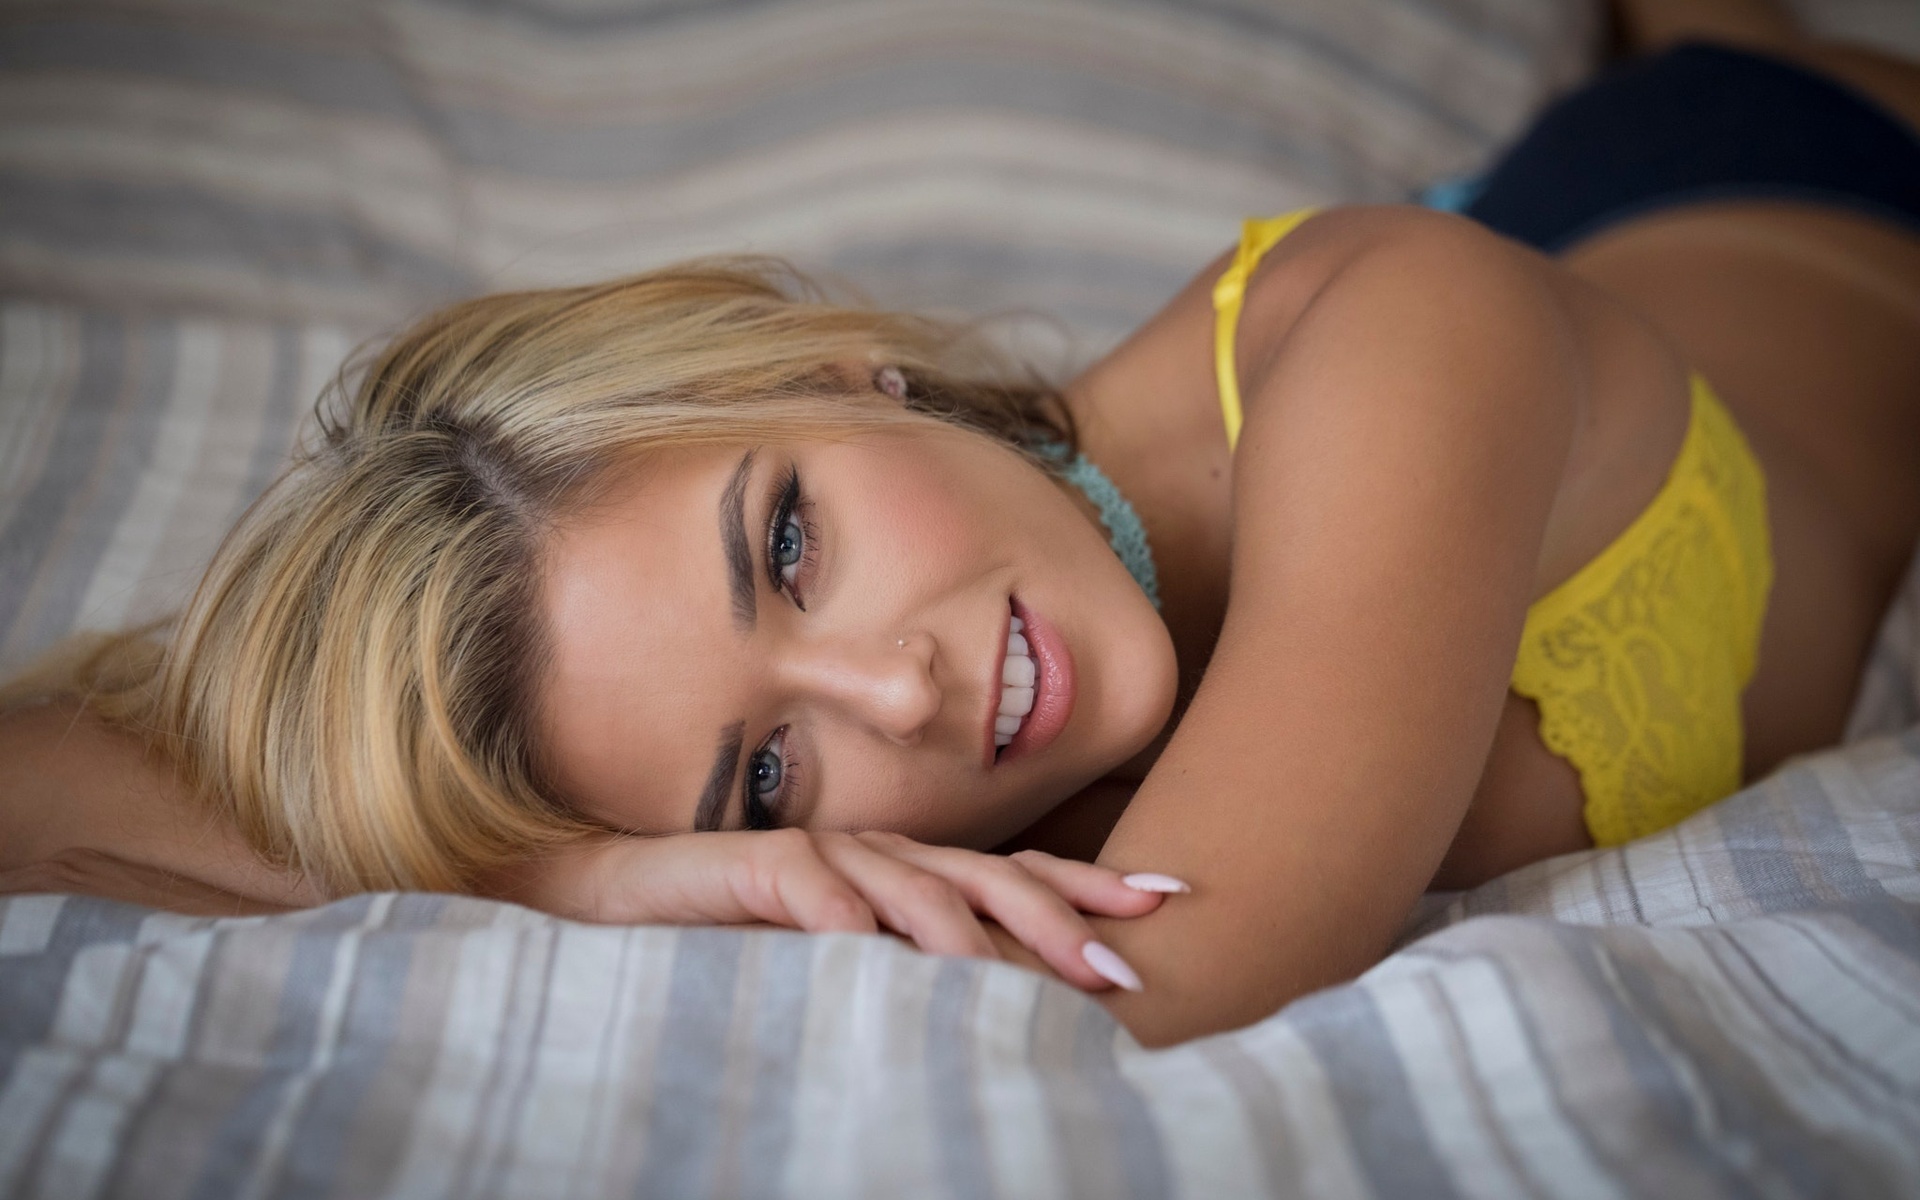 neesy rizzo, women, blonde, smiling, lying on front, in bed, yellow bra, lingerie, tanned, pierced nose, gray eyes, choker, , , , ,   ,  ,  ,  ,  , 